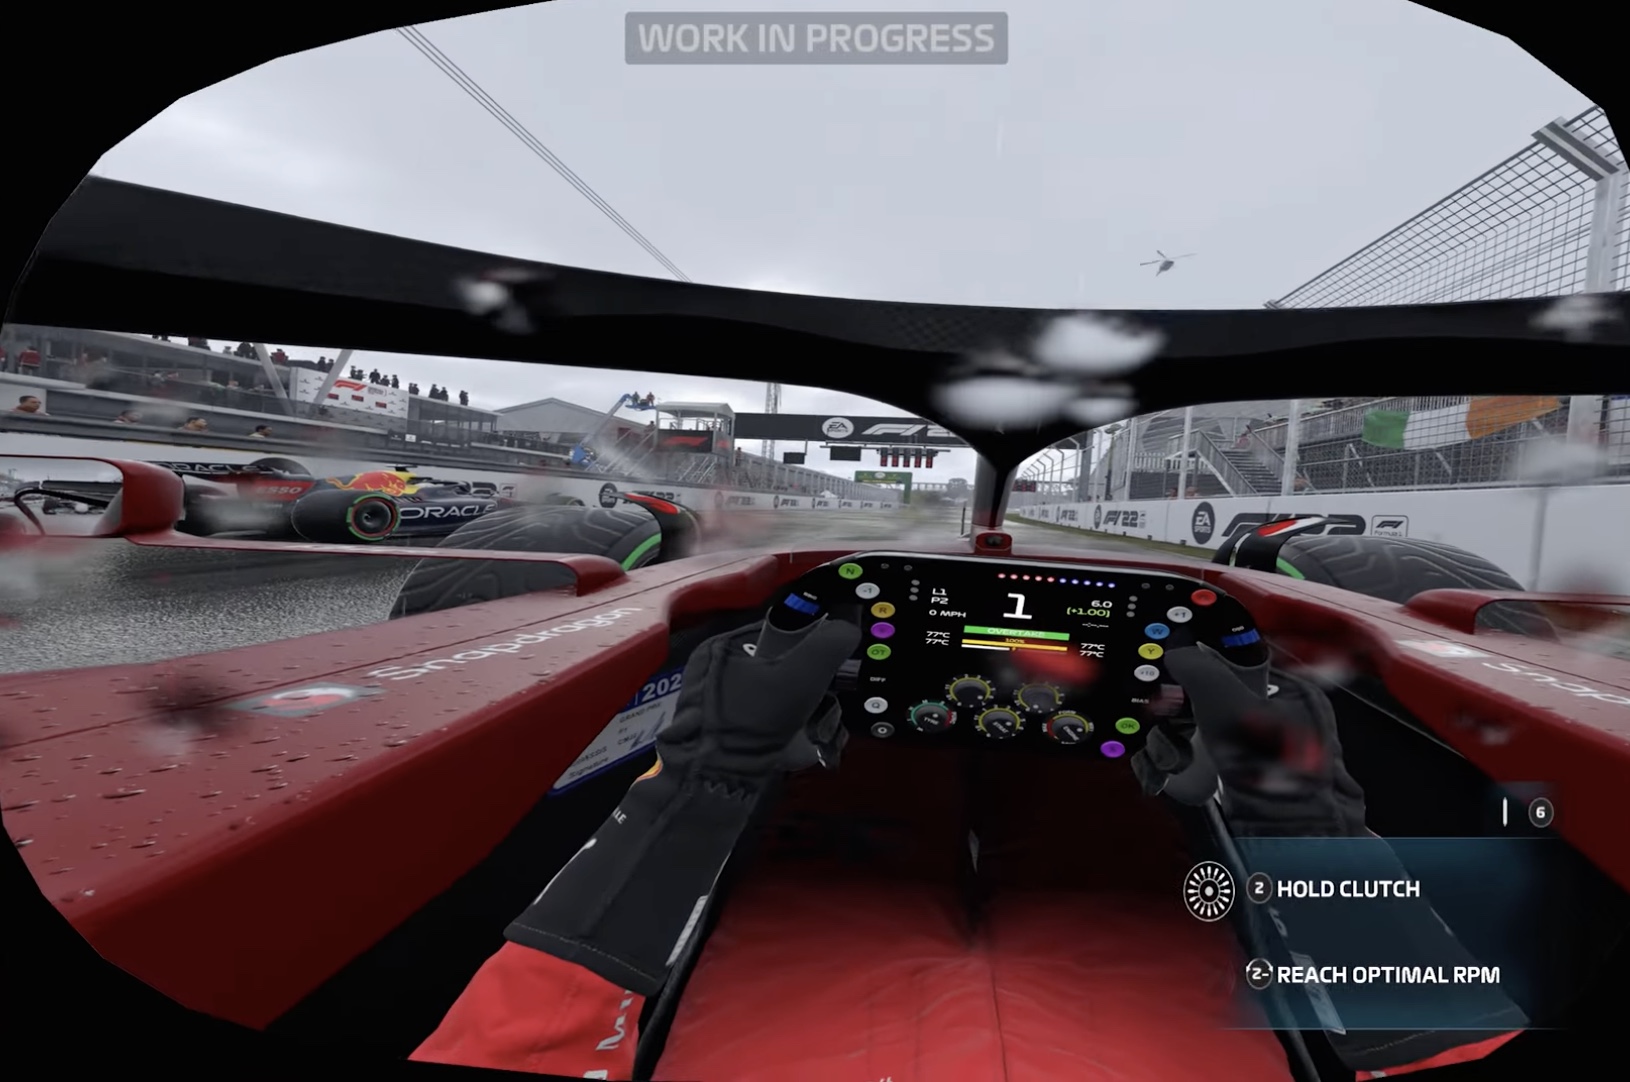 F1 22 VR Gameplay Video - Lance Stroll at Canadian Grand Prix